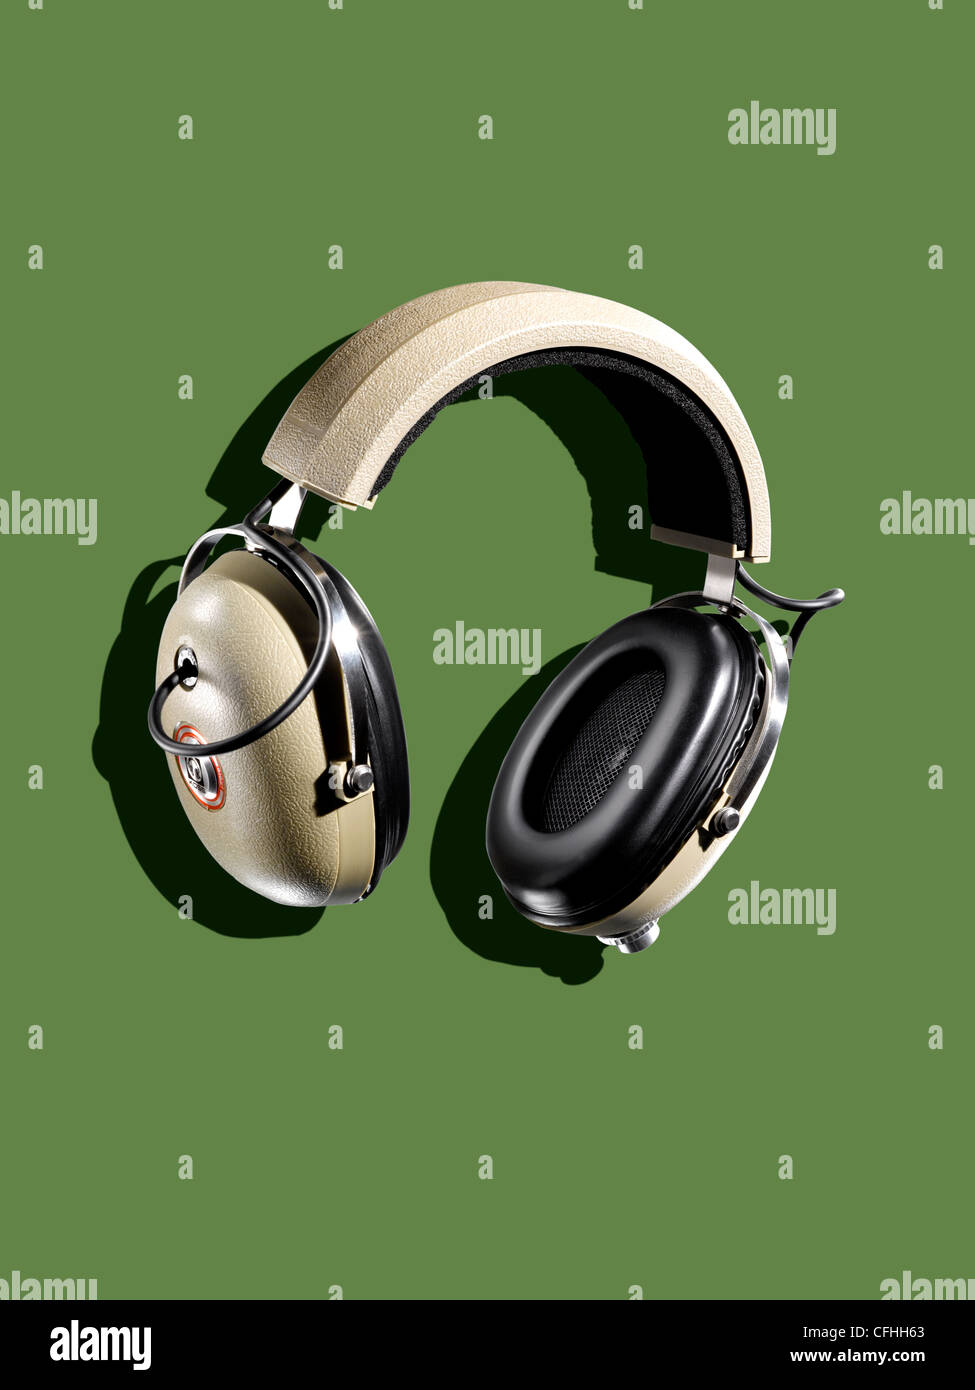 Headphones on a green background Stock Photo